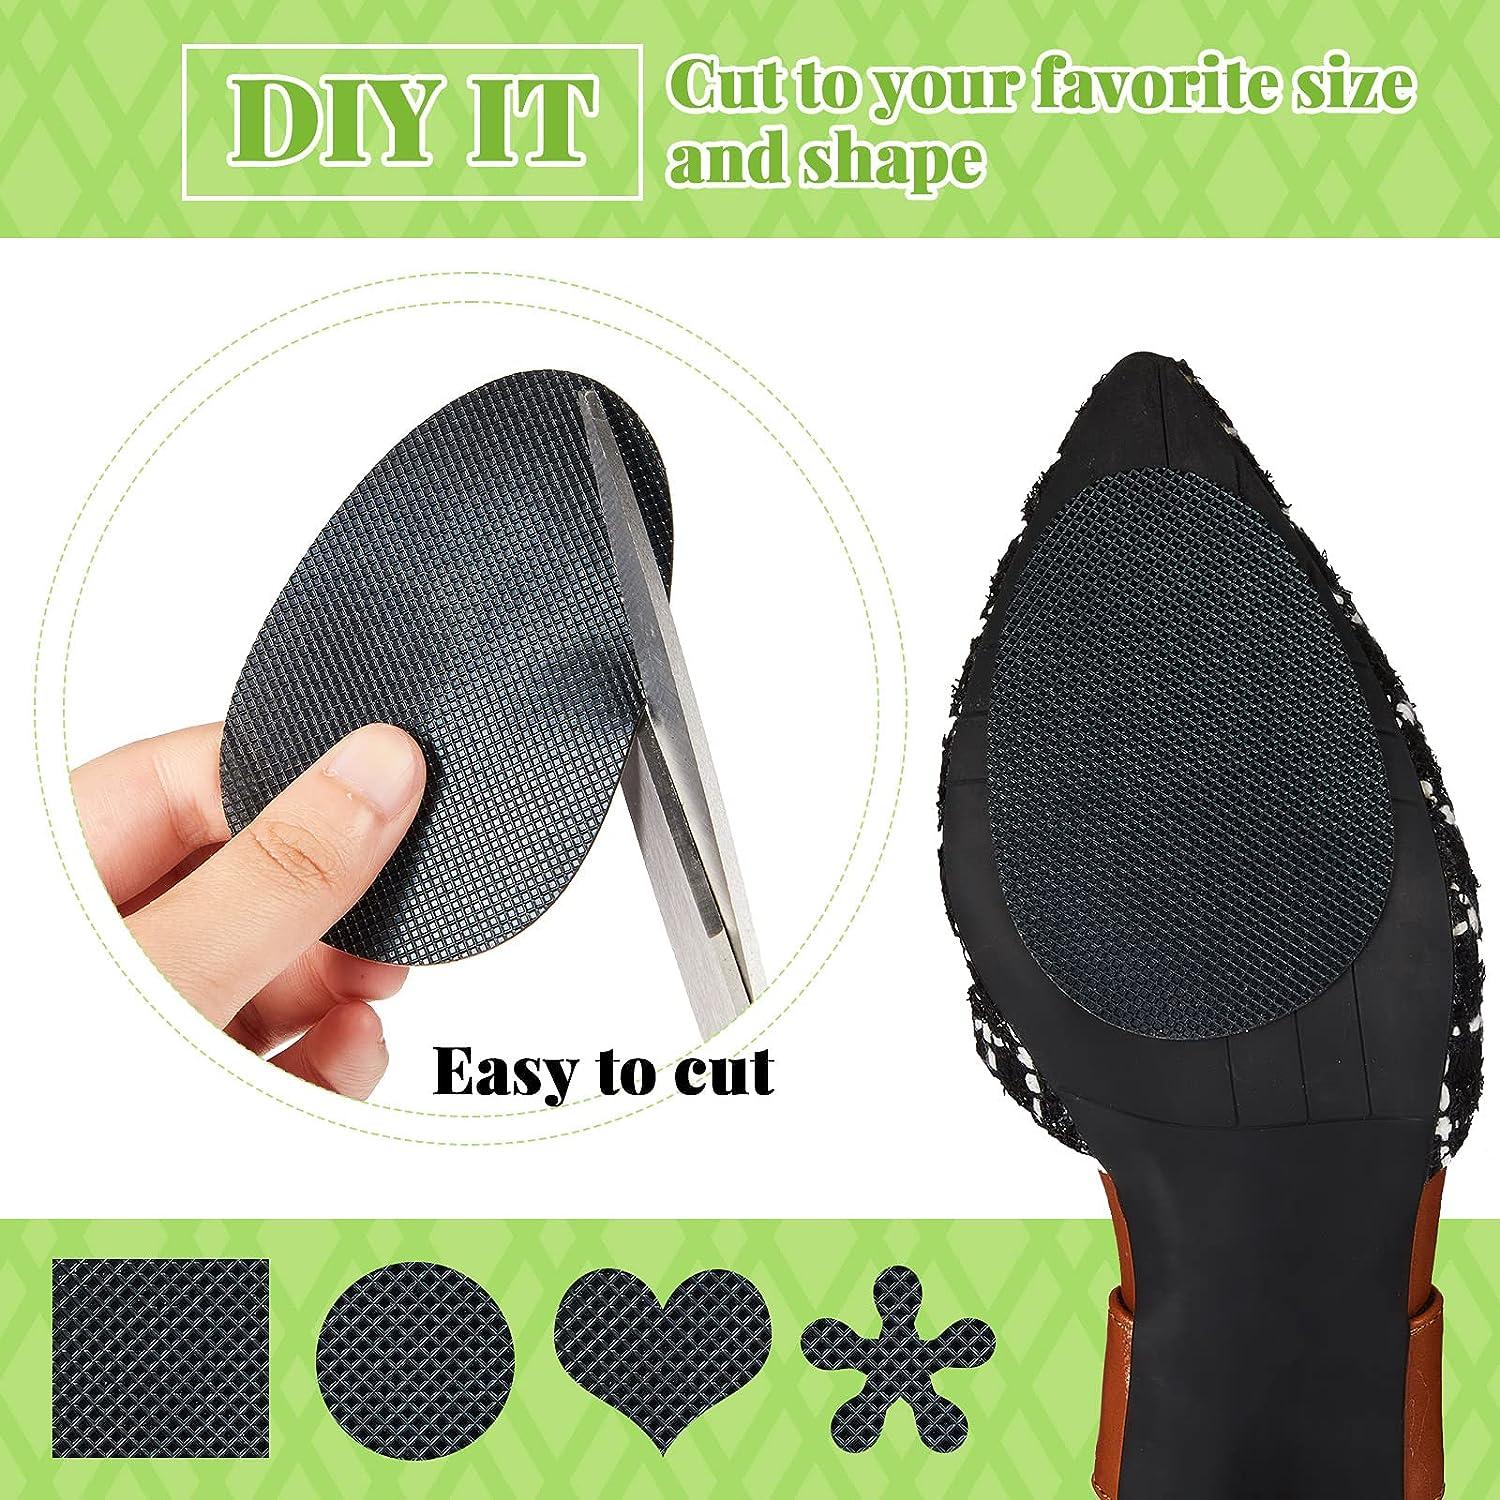 40 Pcs Non Slip Shoes Pads for Shoes Noise Reduction Self Adhesive Non Skid  Shoe Pads Sole Stick Protector Foot Anti Slip Shoe Grips for High Heels